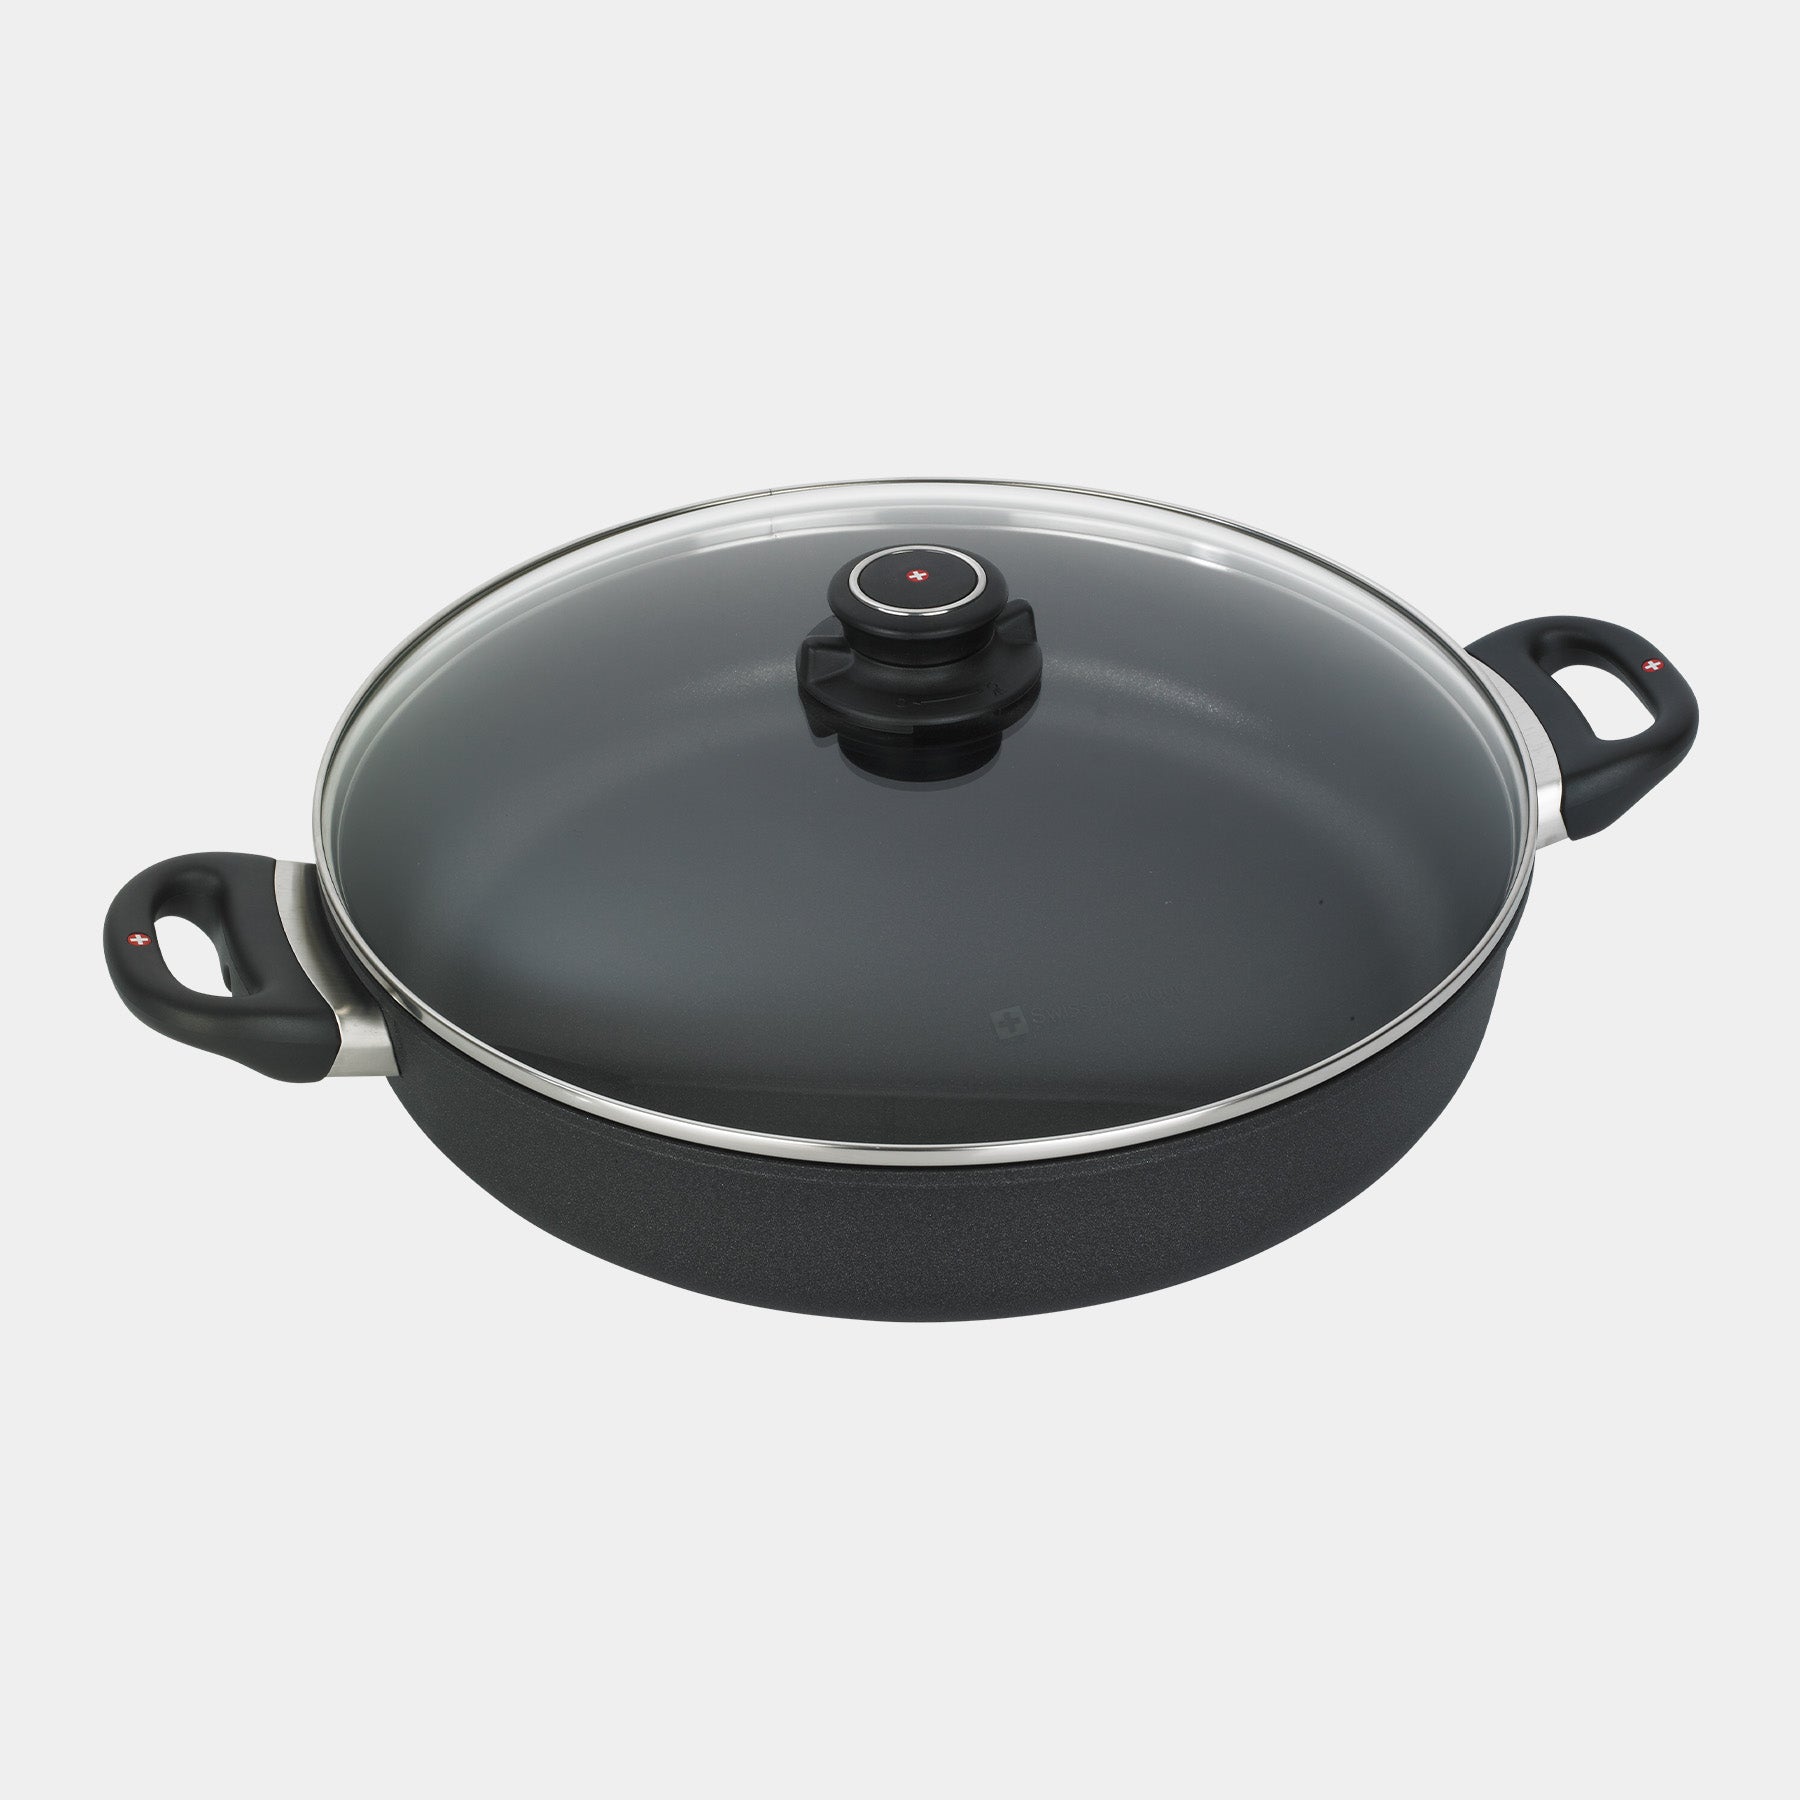 XD 12.5" Nonstick Sauteuse with Glass Lid - Induction